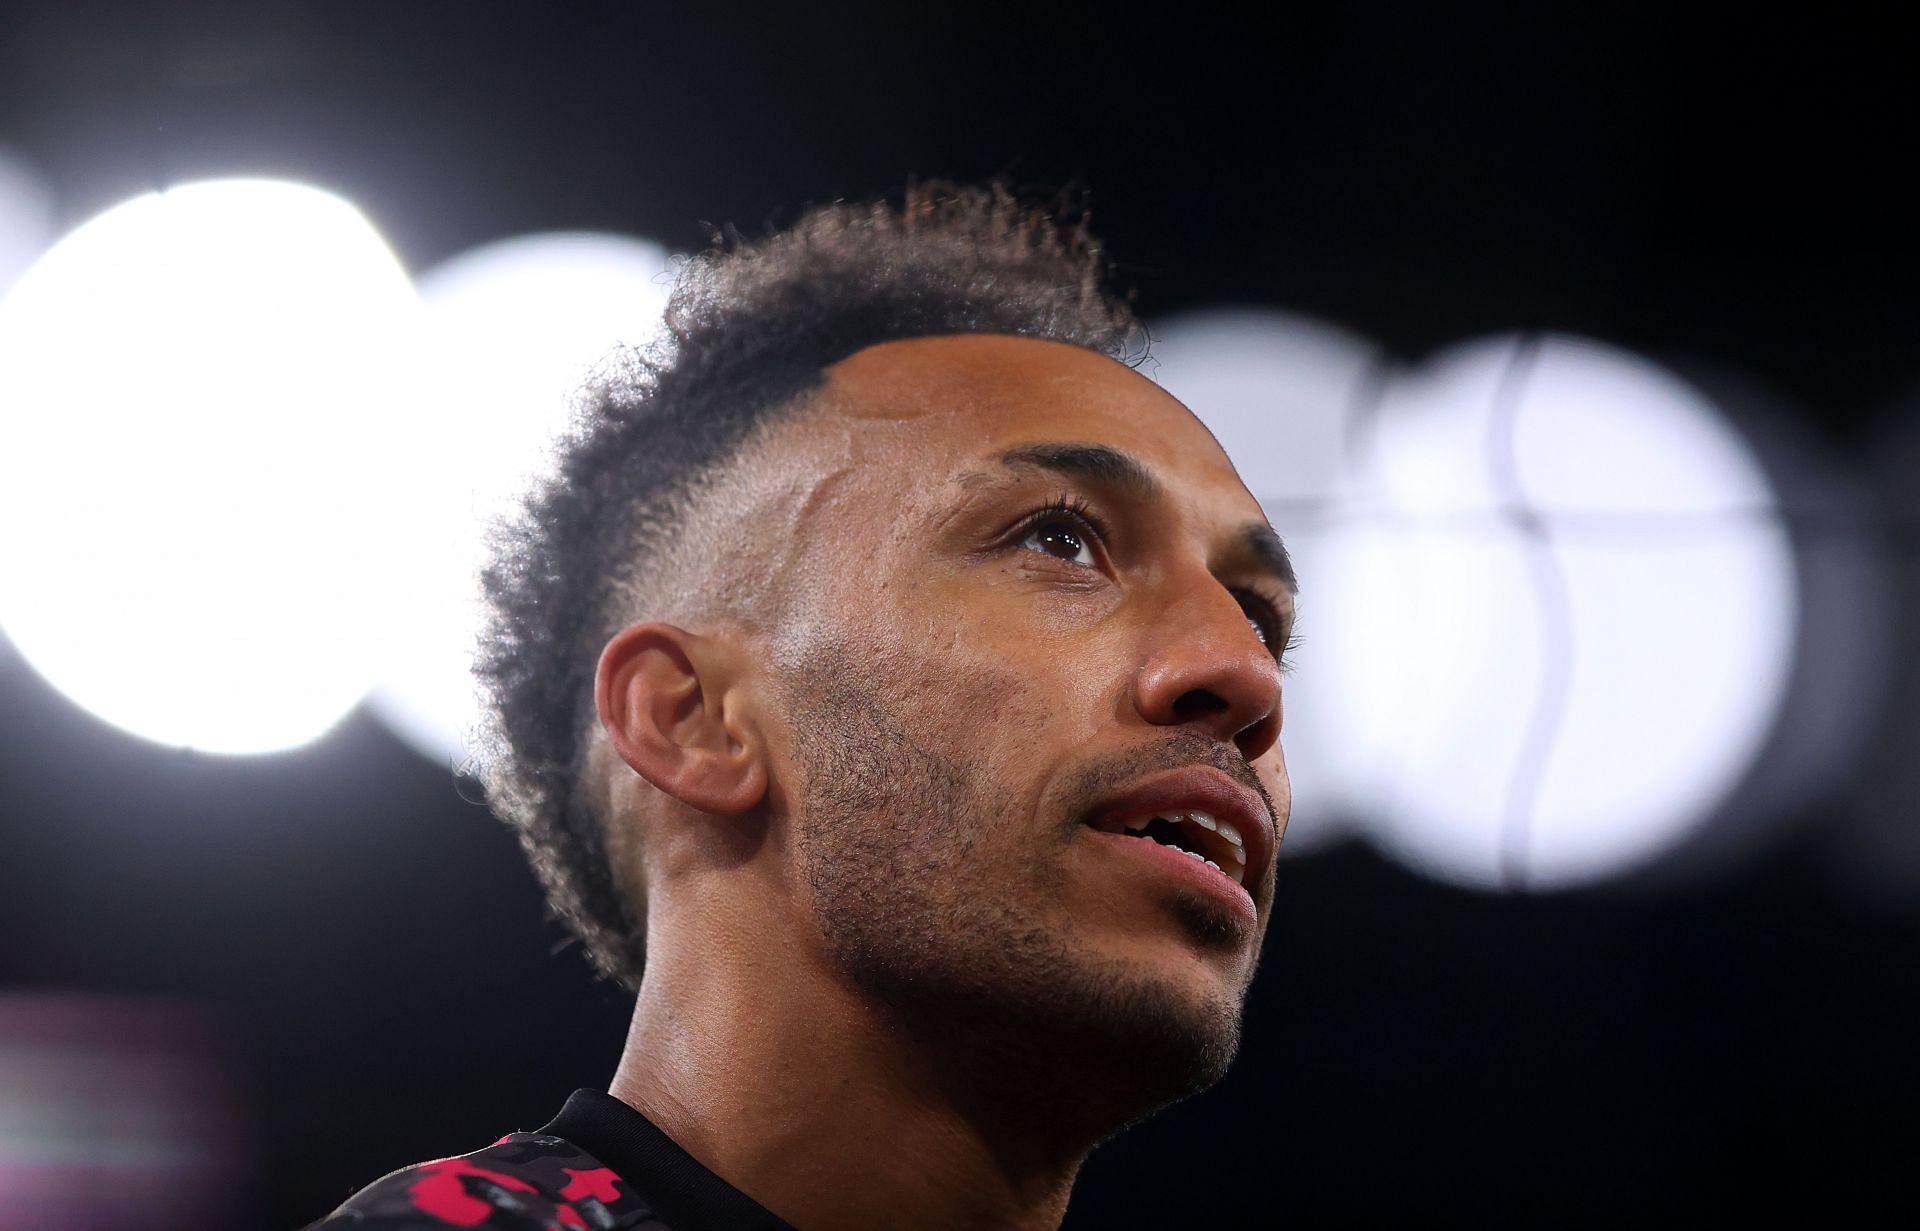 Barcelona are preparing a move for Pierre-Emerick Aubameyang this winter.